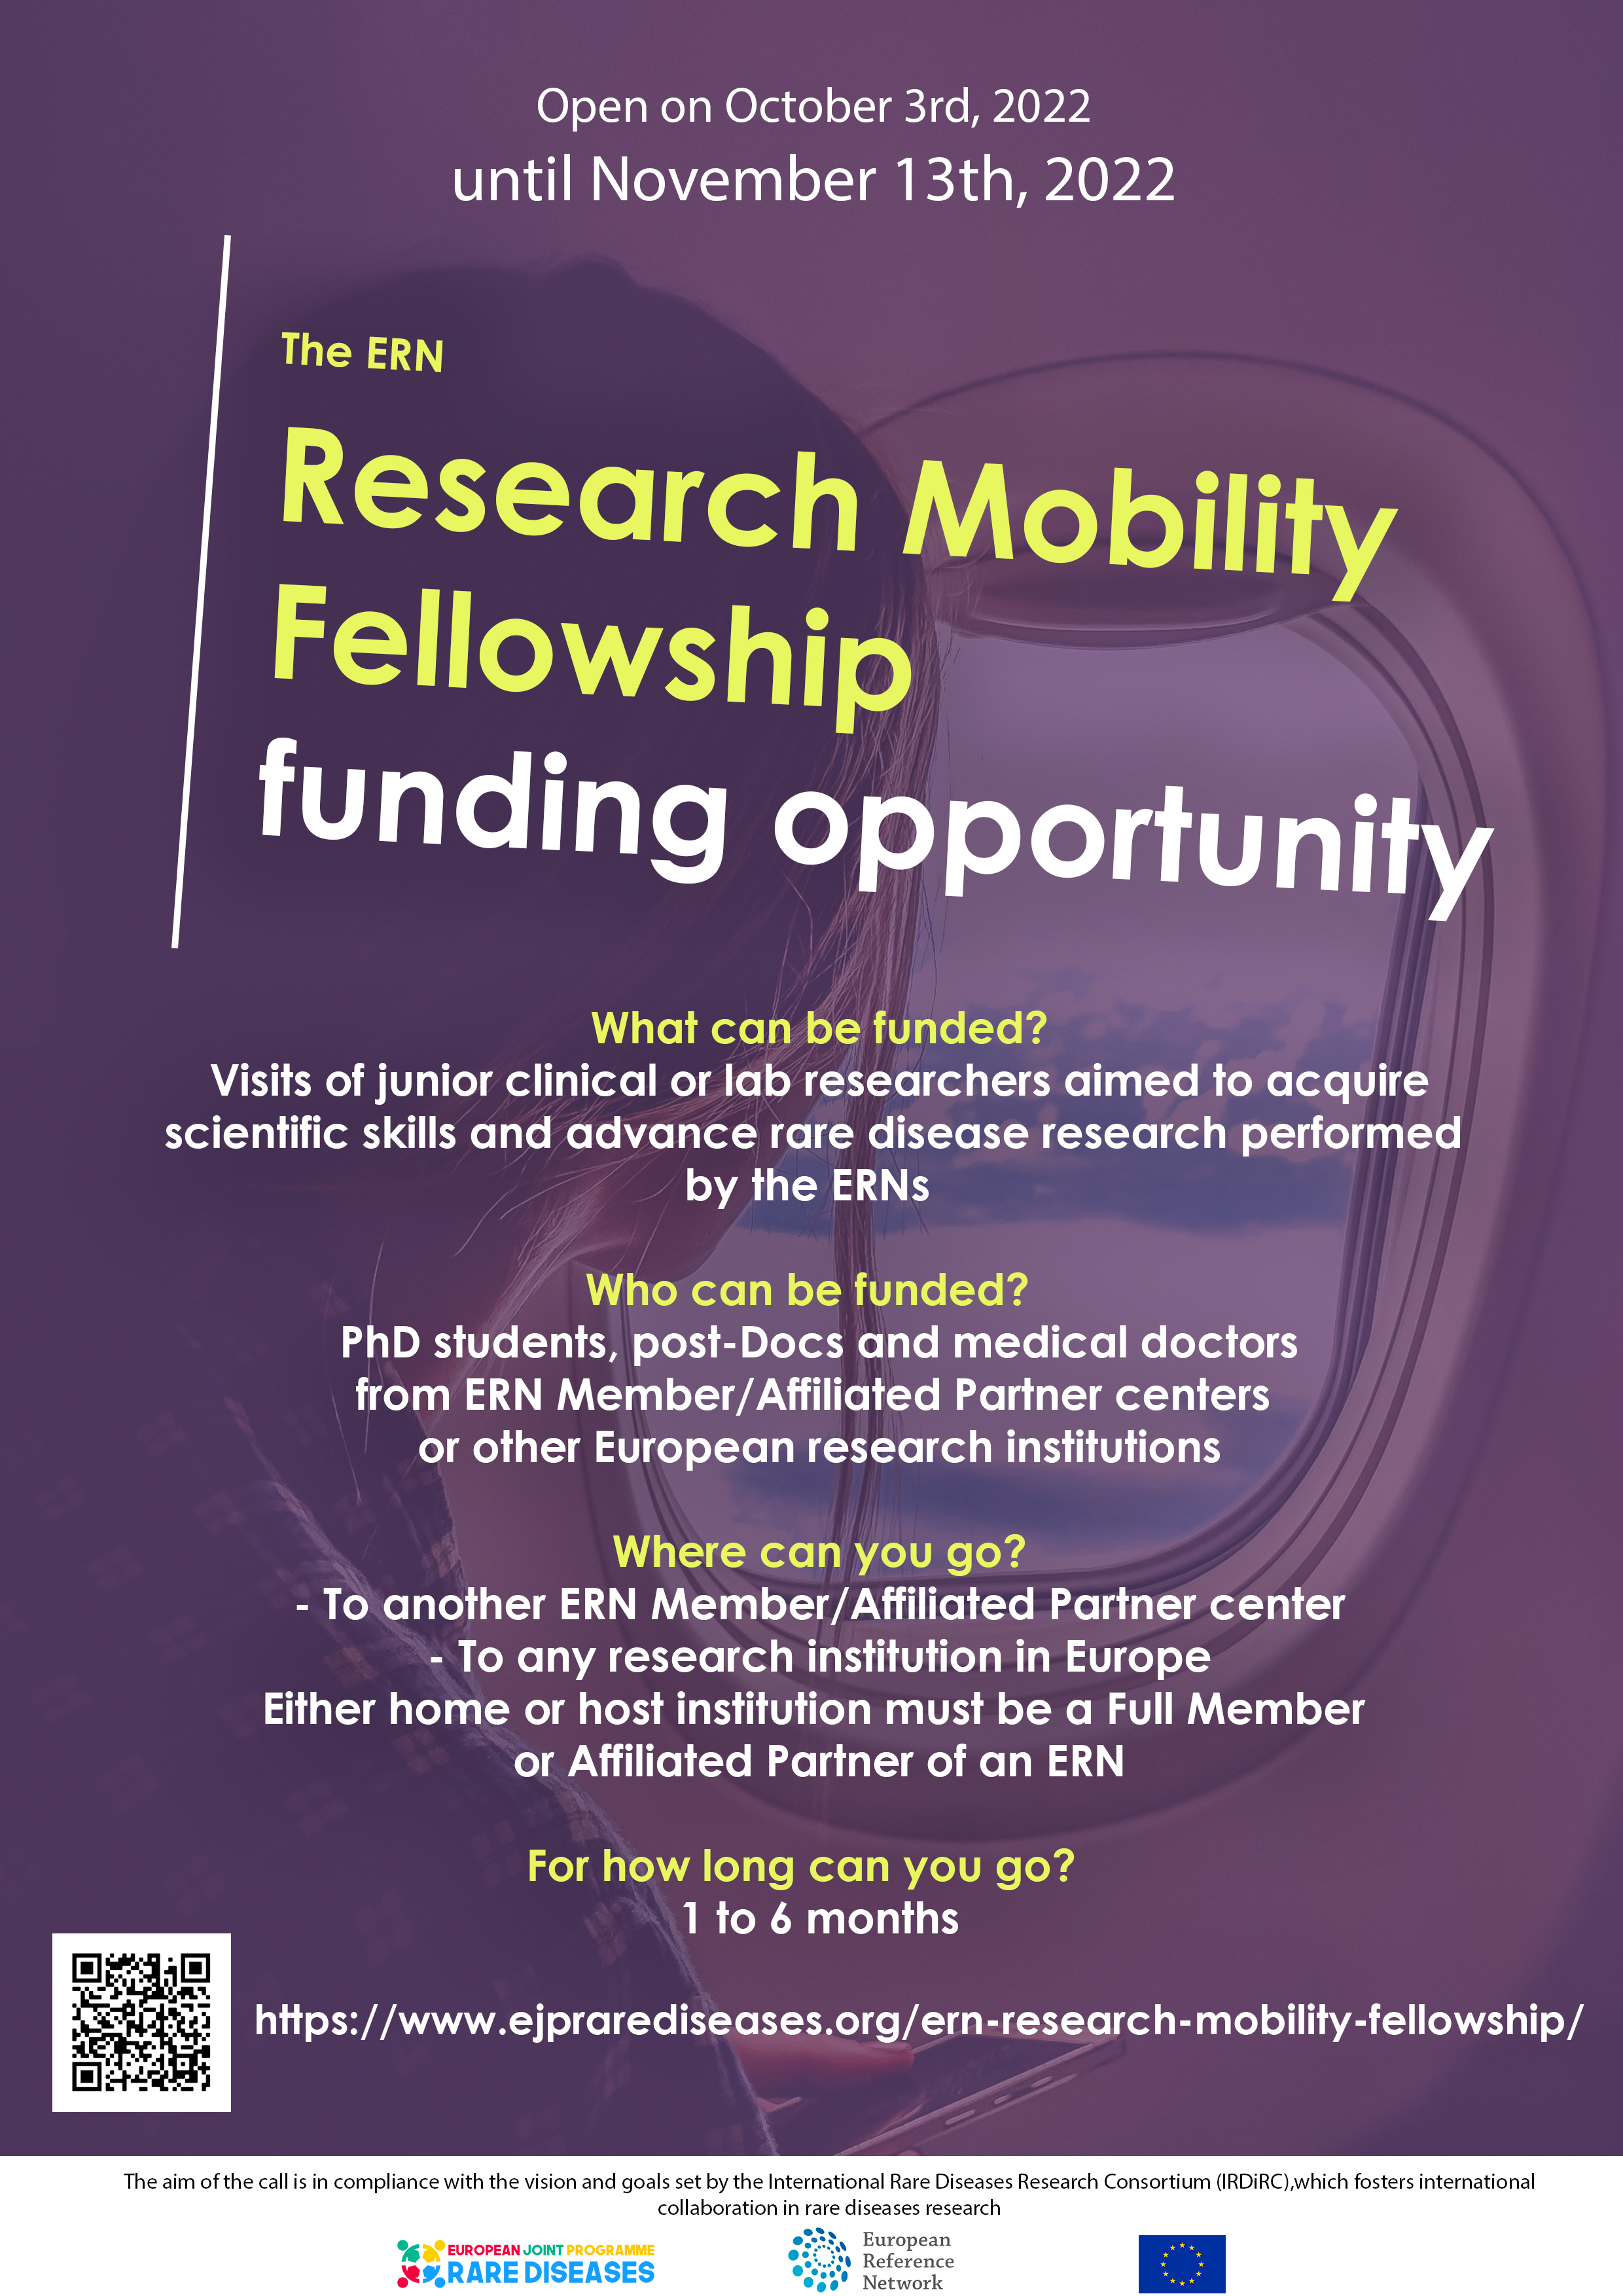 20220829_research-mobility-fellowship-october-2022.jpg